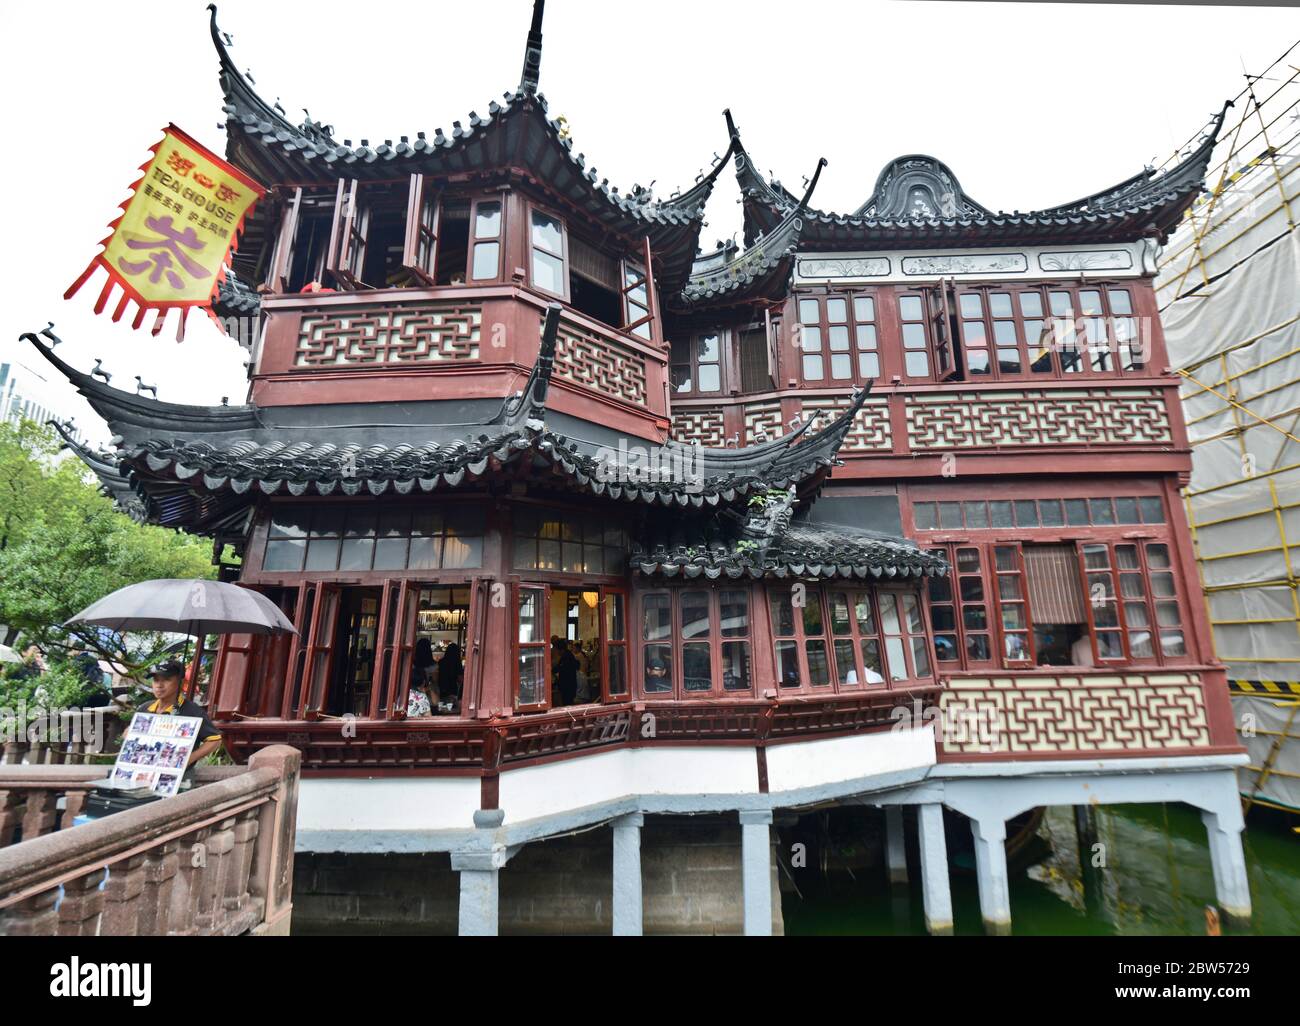 City God Temple of Shanghai: Pavilions and teahouses in the Chenghuang Miao area. China Stock Photo